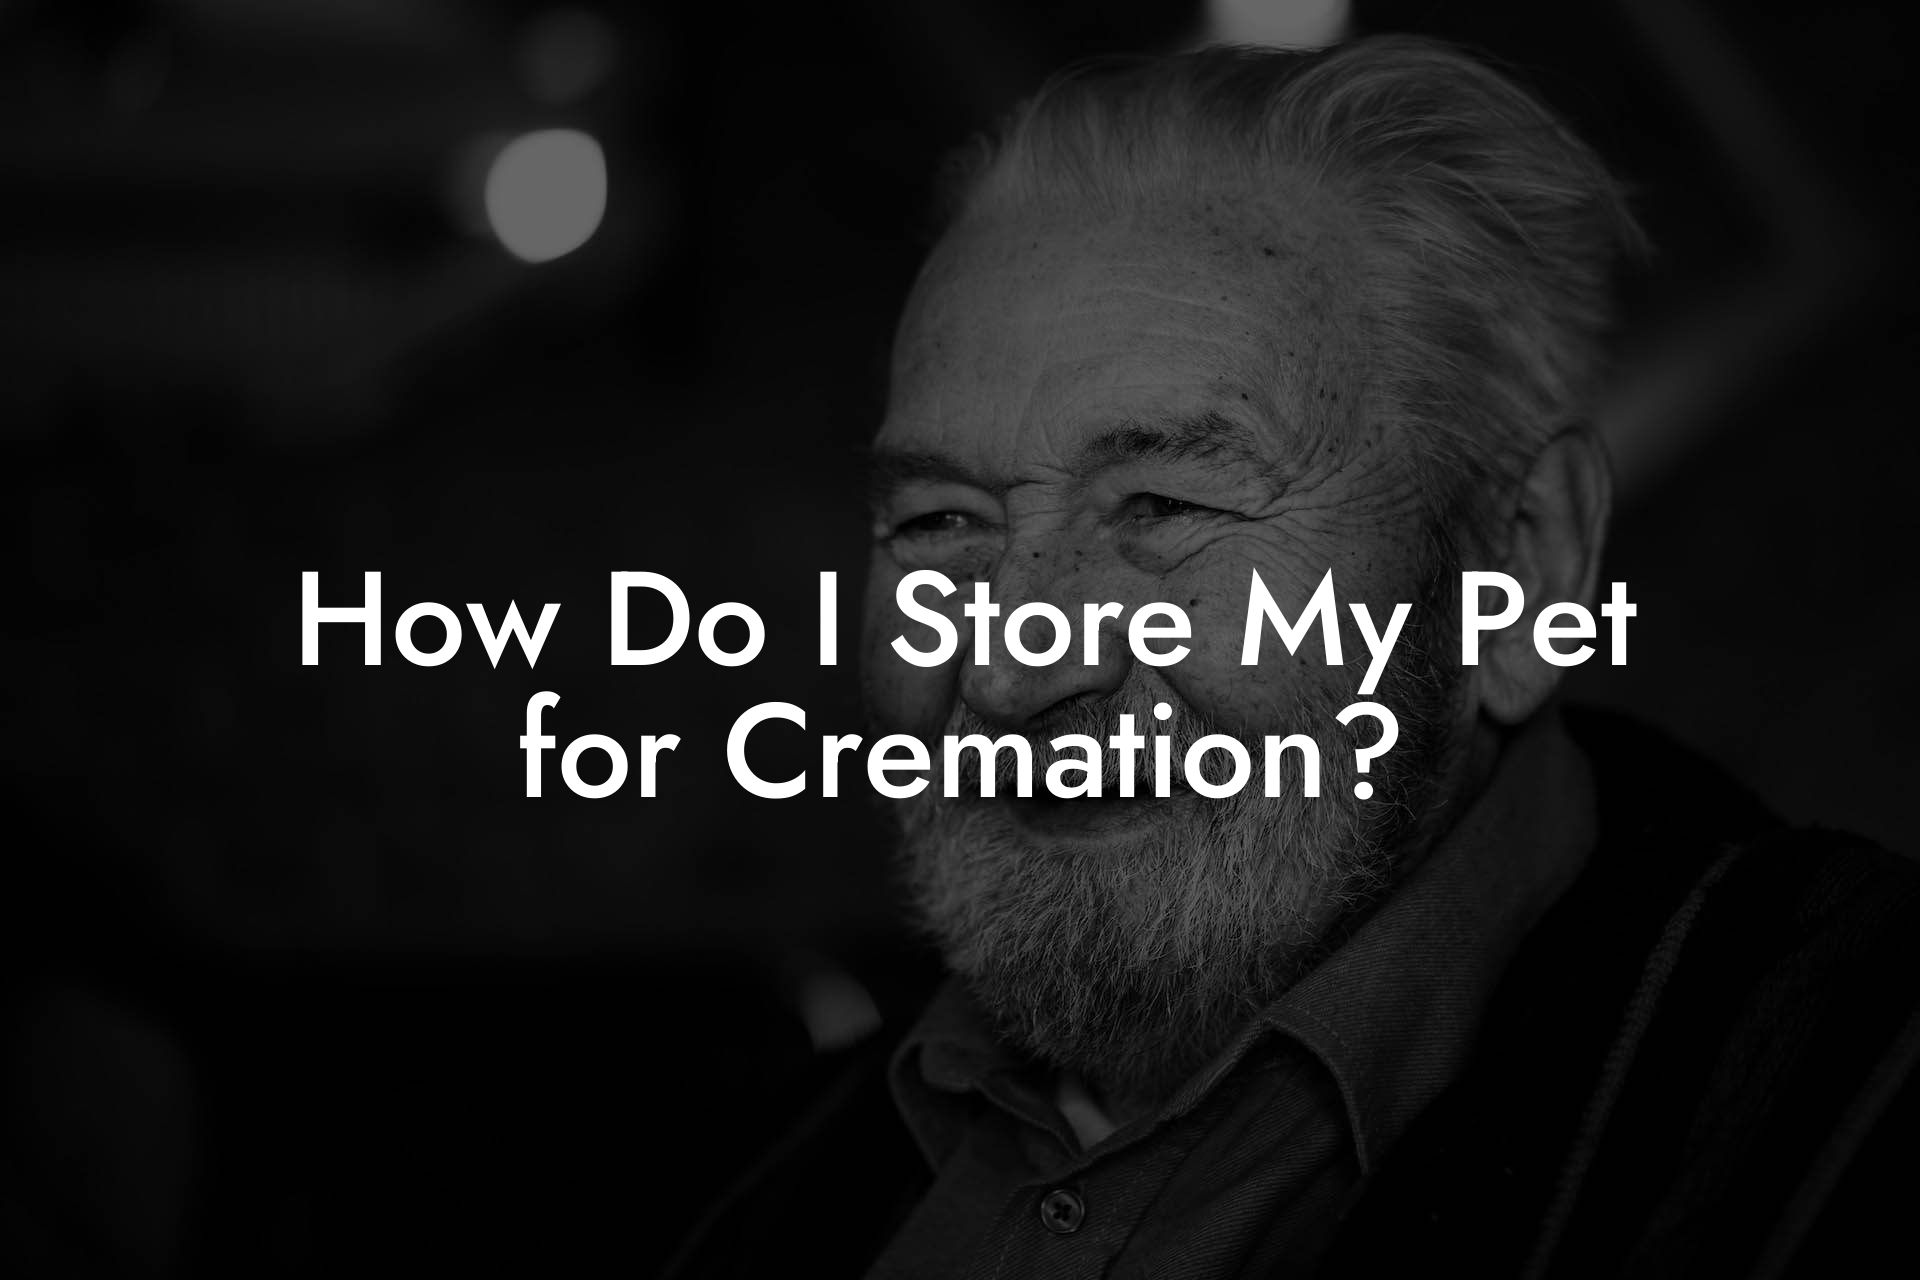 How Do I Store My Pet for Cremation?